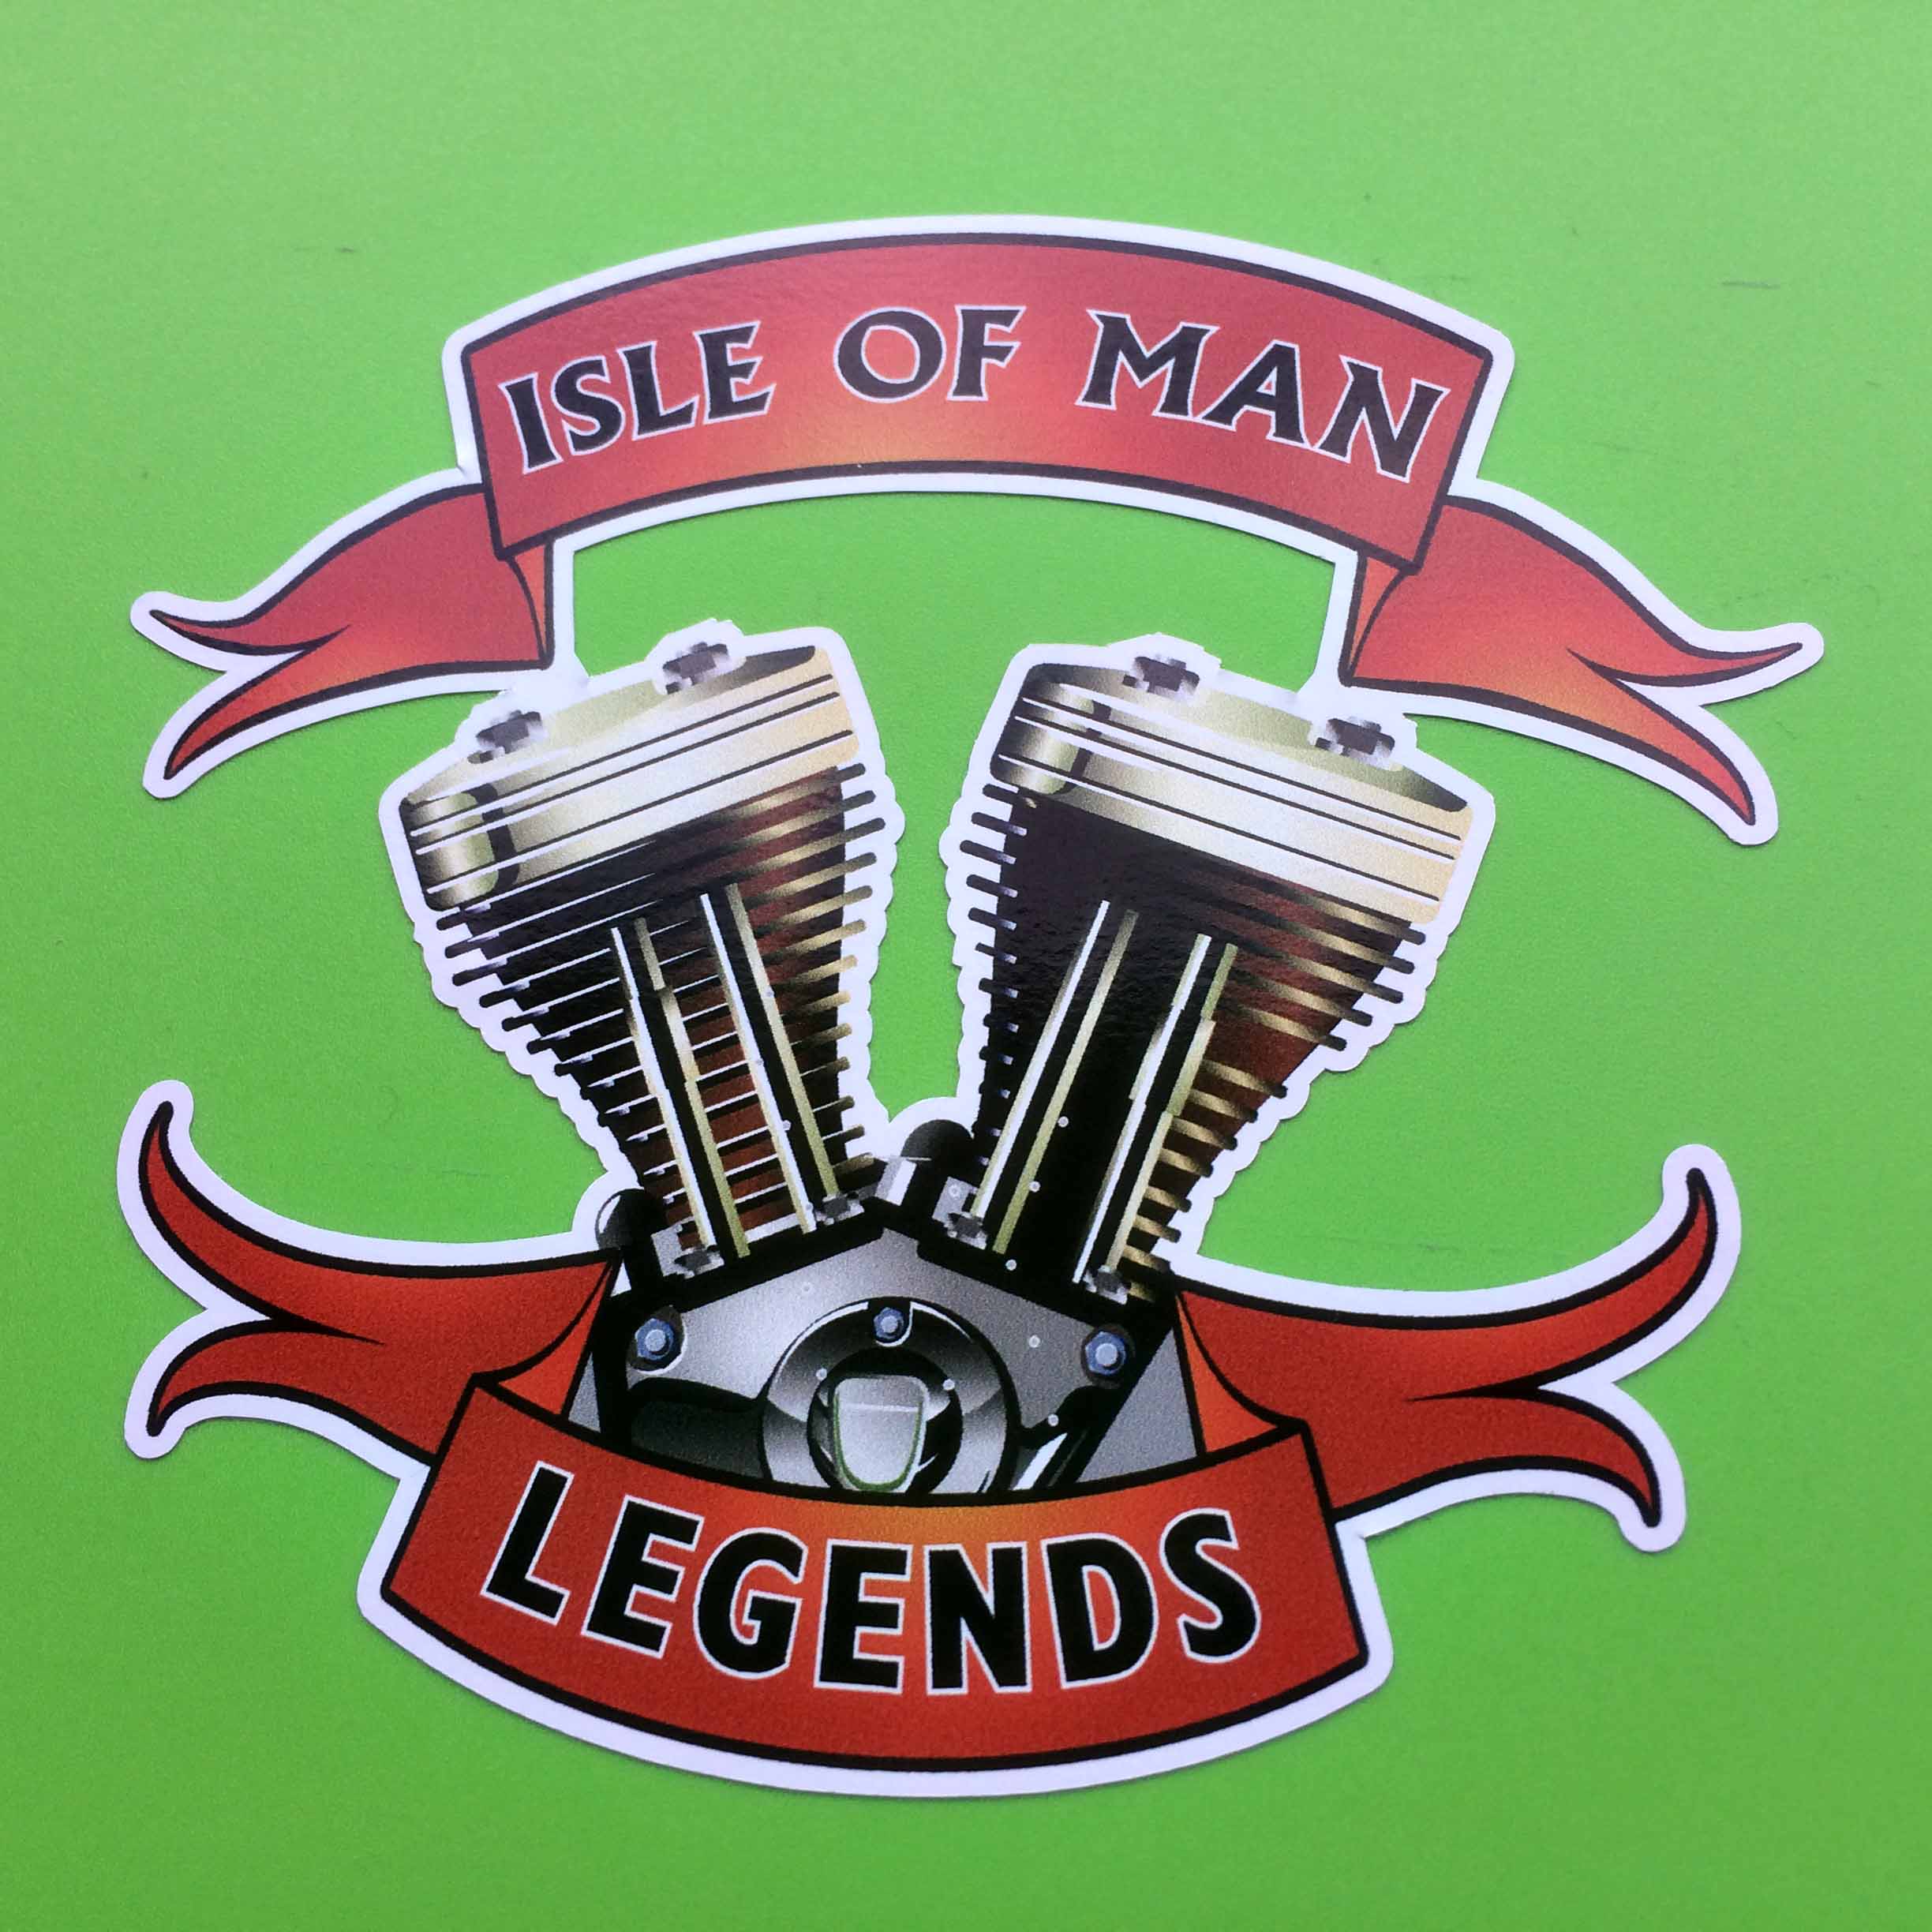 ISLE OF MAN LEGENDS STICKERS. Isle Of Man Legends in black lettering on two red banners. An image of a V block crankcase sits between the banners.